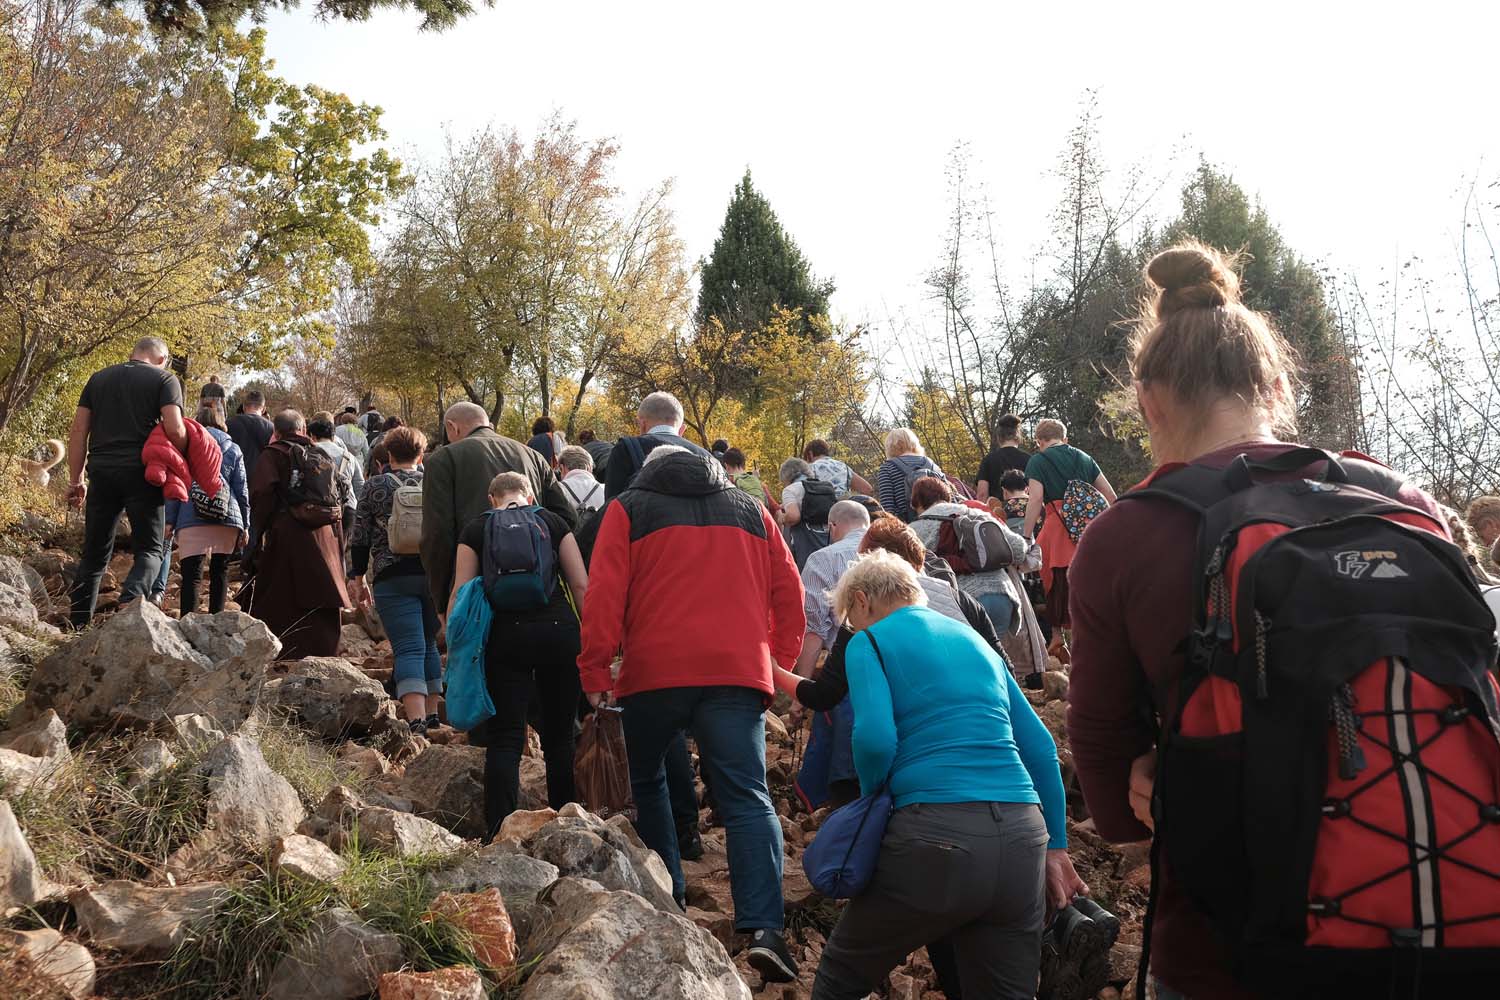 Pilgrims walk towards the site where the Virgin Mary allegedly appeared in 1981. Taken in November 2019.